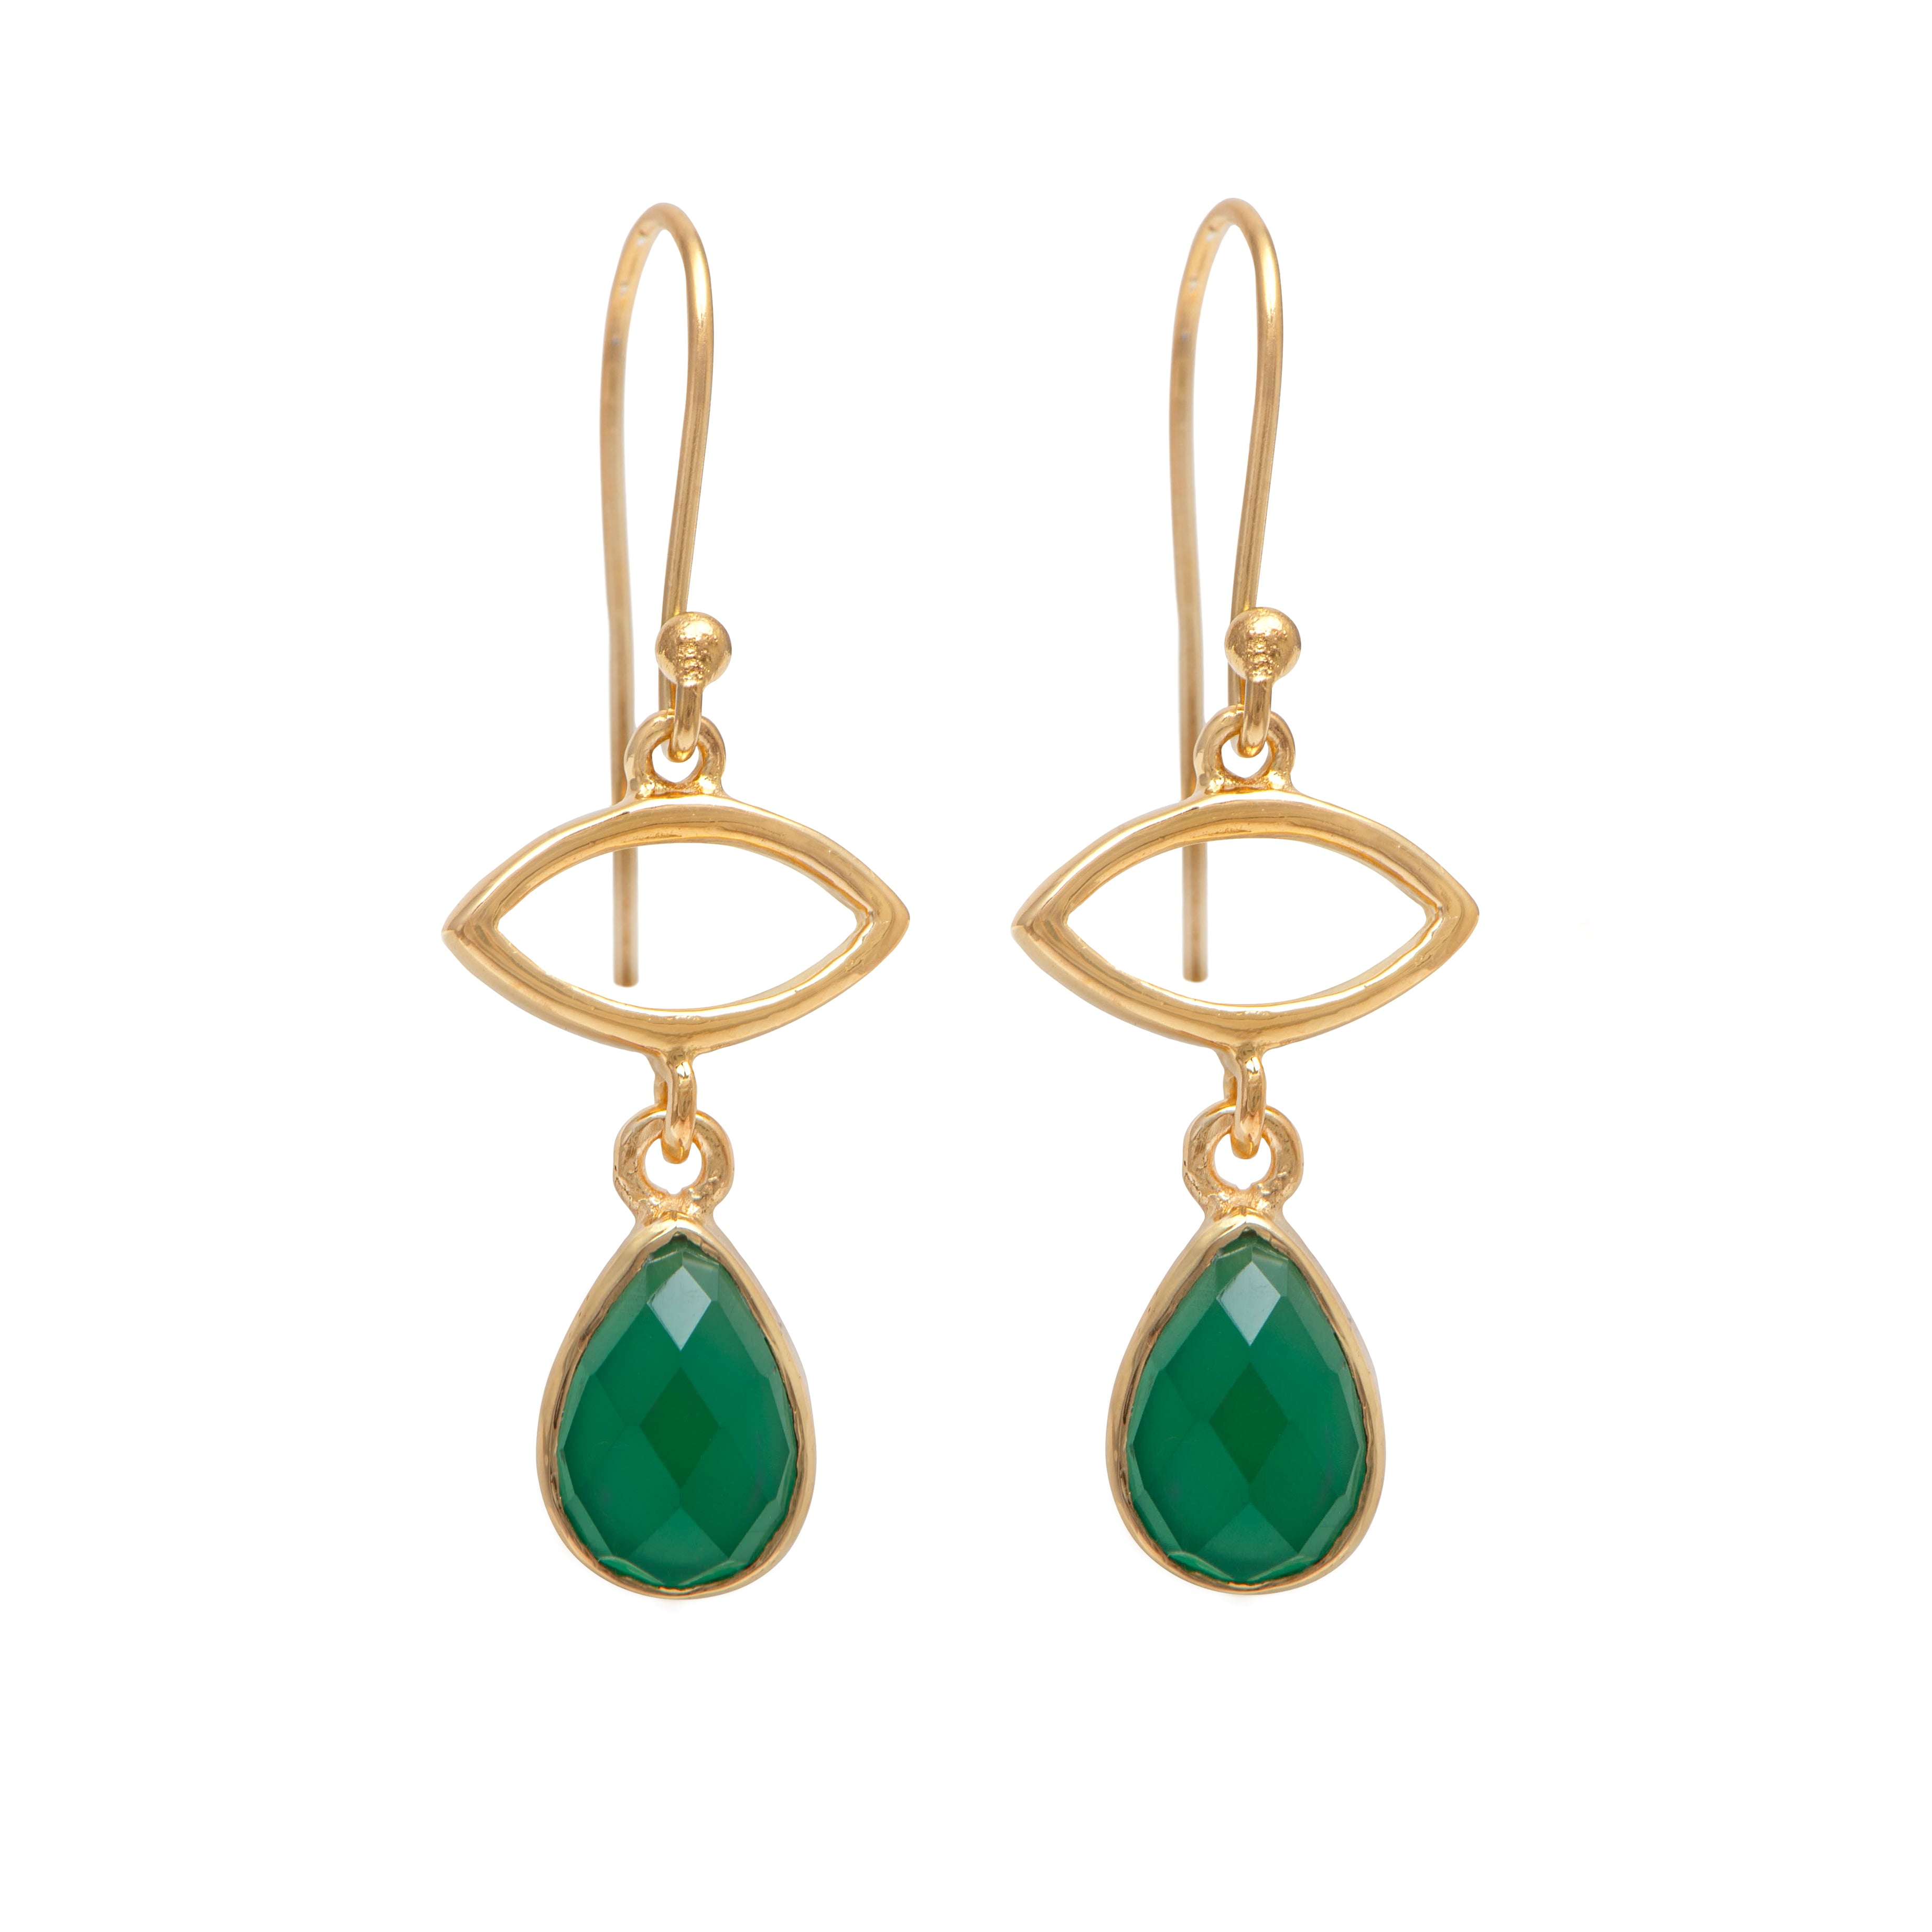 Gold Plated Drop Earrings with Green Onyx Gemstone